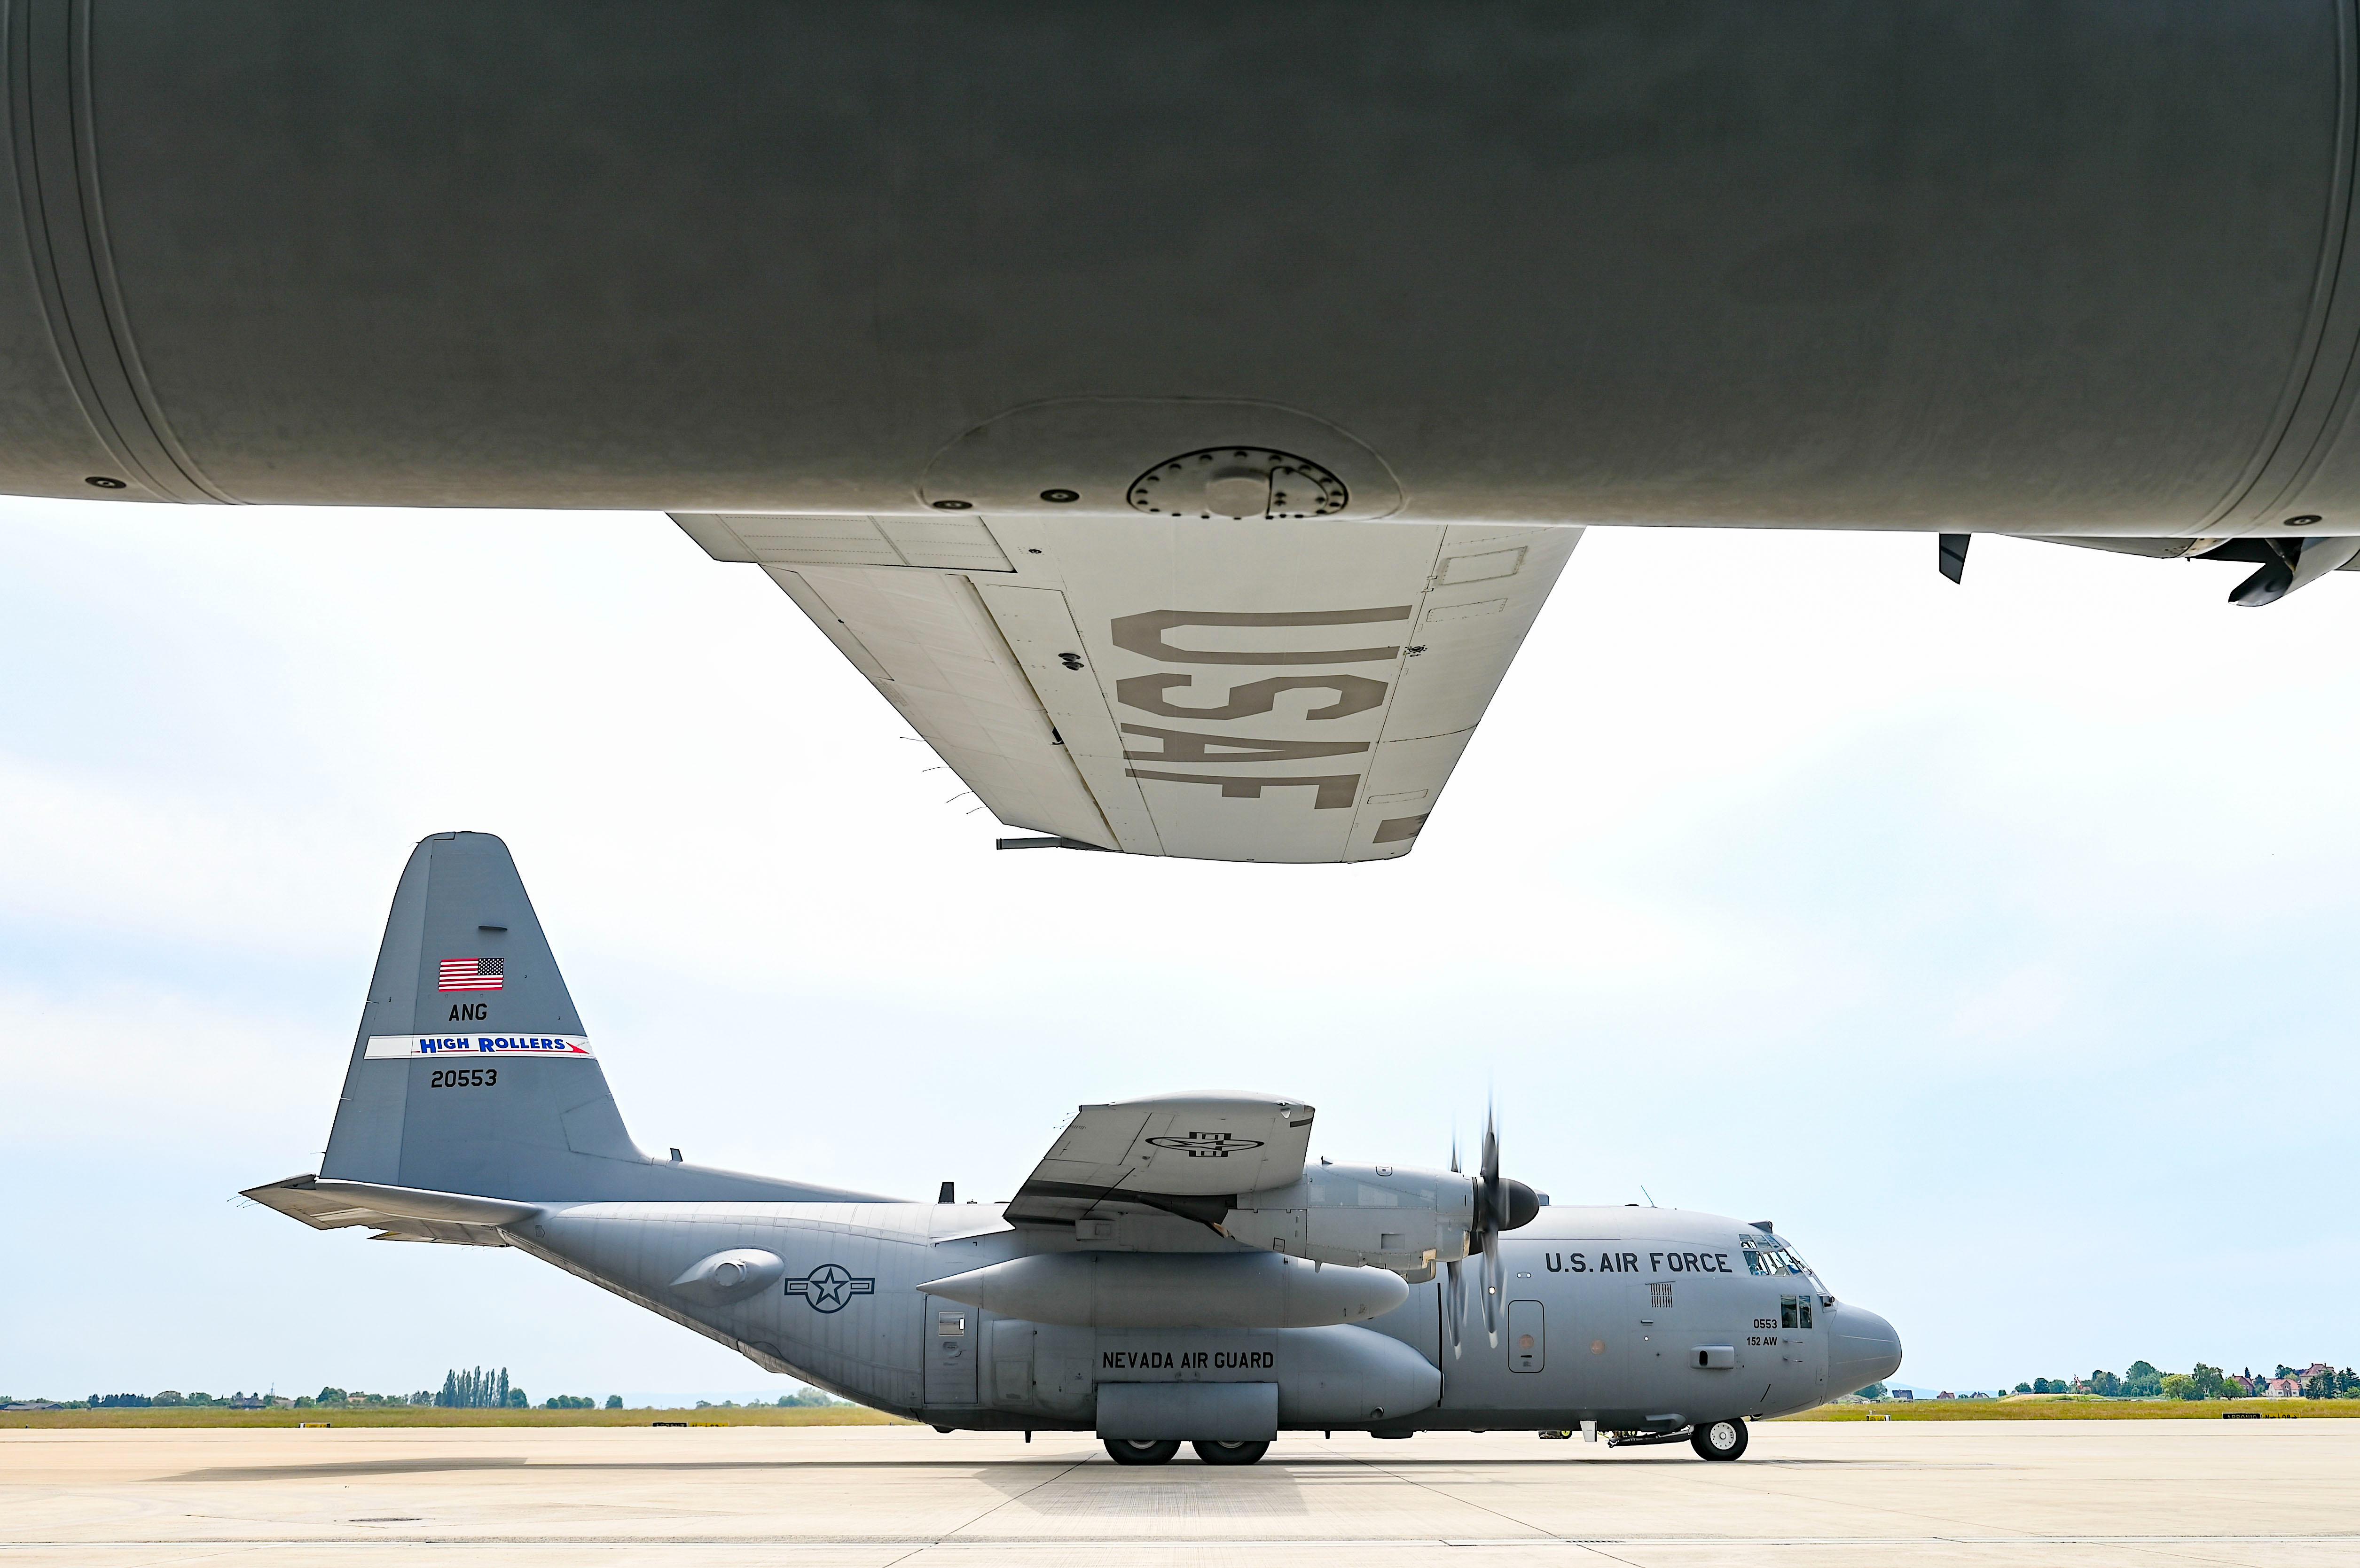 A U.S. Air Force C-130 Hercules aircraft, with the 152nd Airlift Wing, Nevada National Guard, begins to taxi in preparation for exercise Air Defender 2023 (AD23) at Wunstorf Air Base, Wunstorf, Germany, June 6, 2023. Exercise AD23 integrates both U.S. and Allied air-power to defend shared values, while leveraging and strengthening vital partnerships to deter aggression around the world. (U.S. Air National Guard photo by Master Sgt. Caila Arahood)